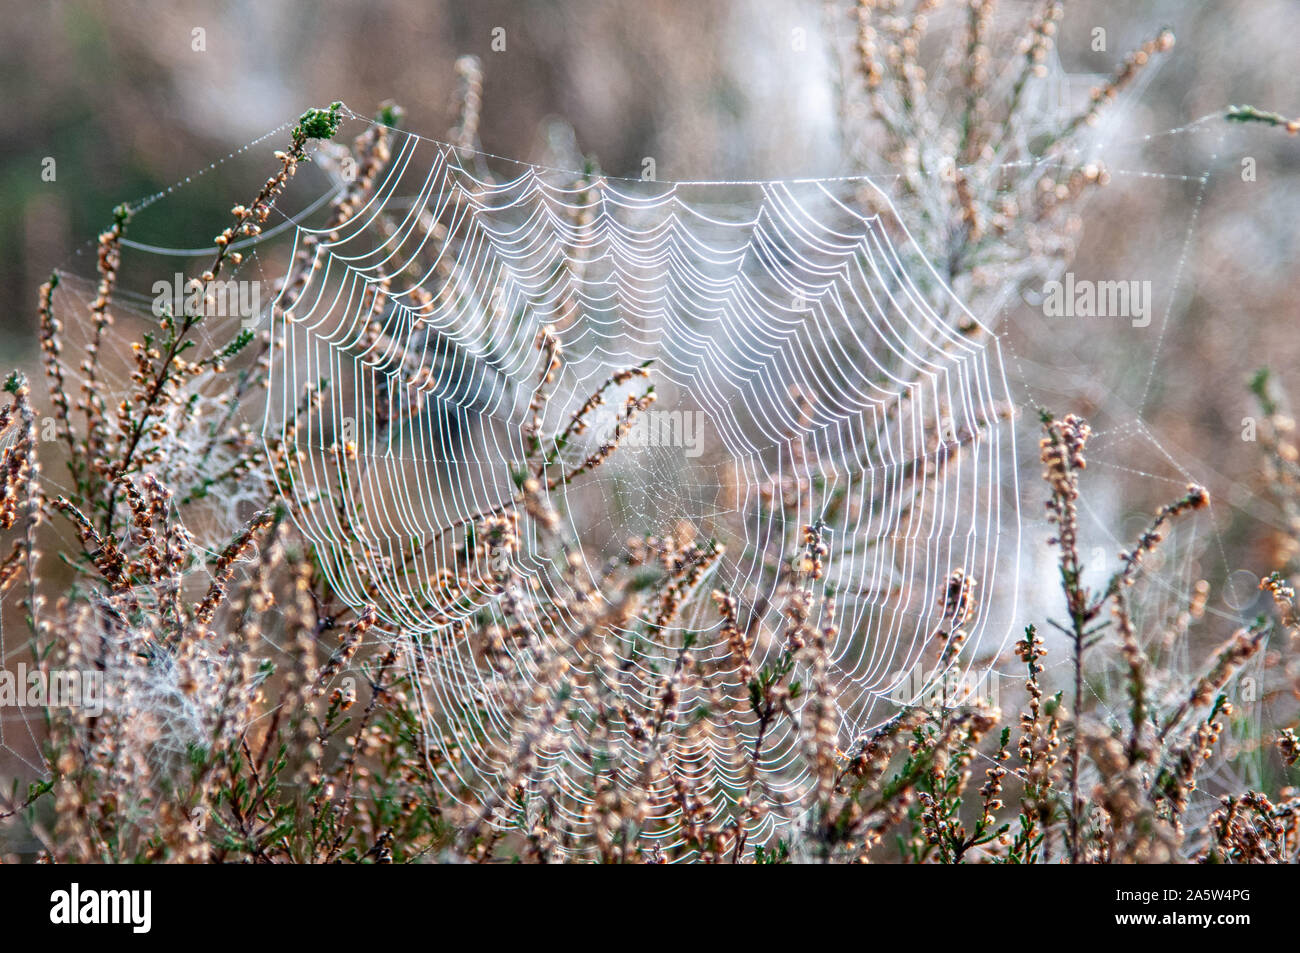 Mutliable spiders webs backlit with the Autumn morning sunshine on small shrubs. Southborough Common, Tunbridge Wells, Kent. Stock Photo